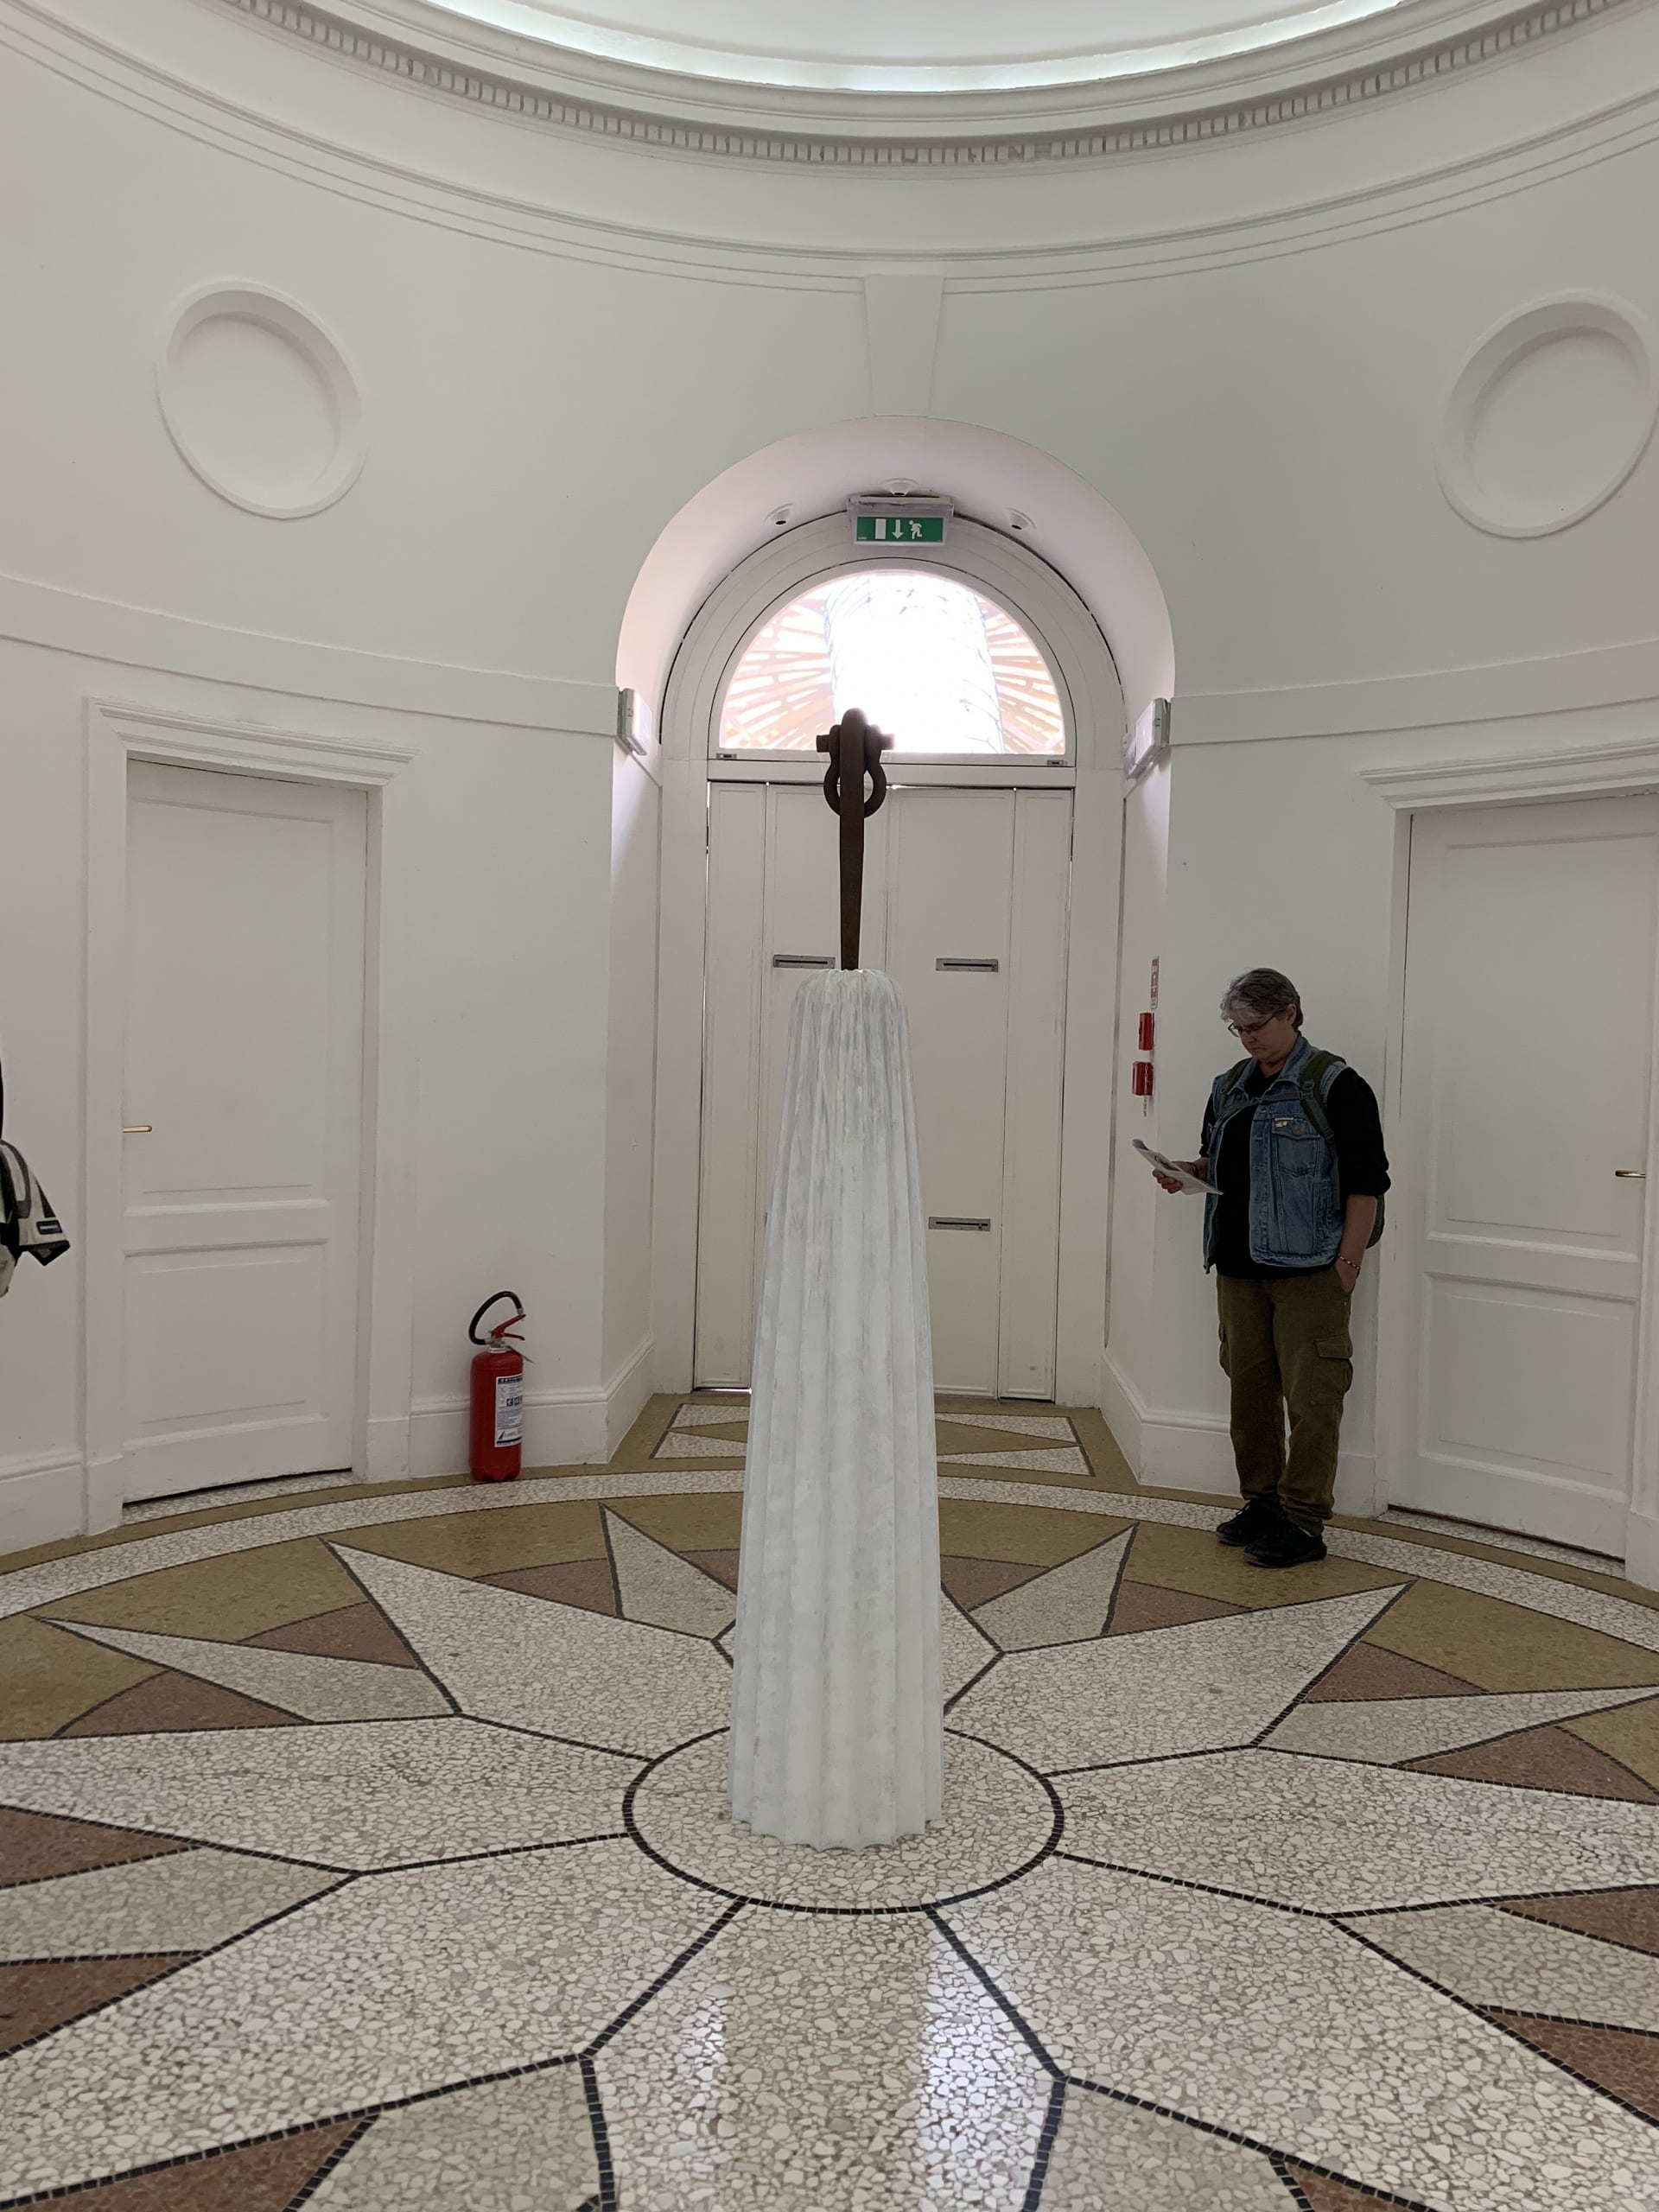 light-filled Neo-Classical rotunda with an oculus. A tapered column from which a single iron shackle rises